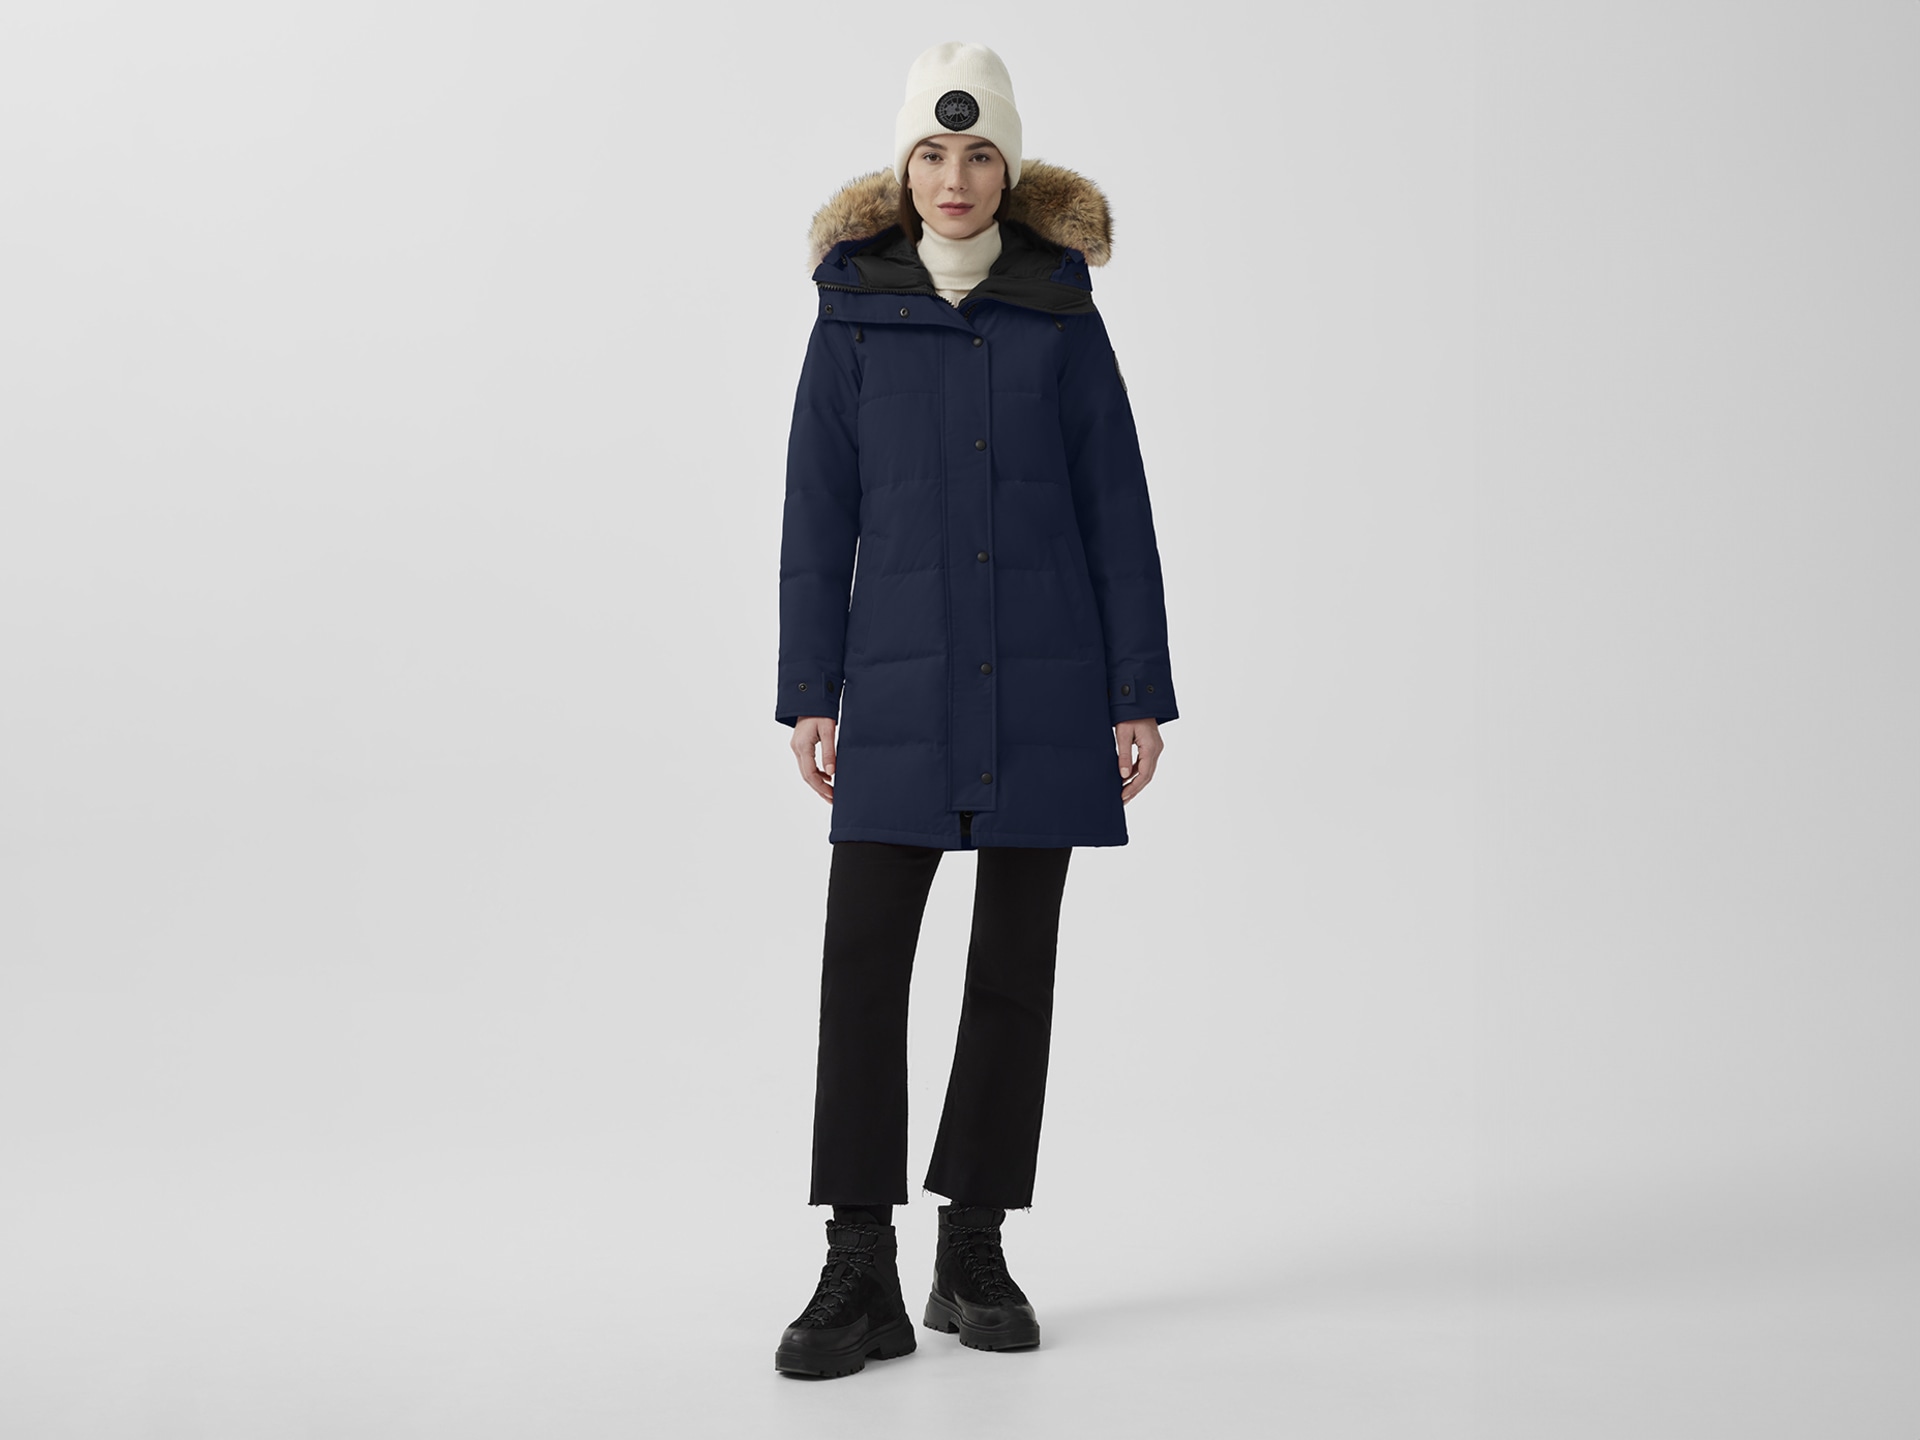 Unlock Wilderness' choice in the Marmot Vs Canada Goose comparison, the Shelburne Parka Heritage by Canada Goose